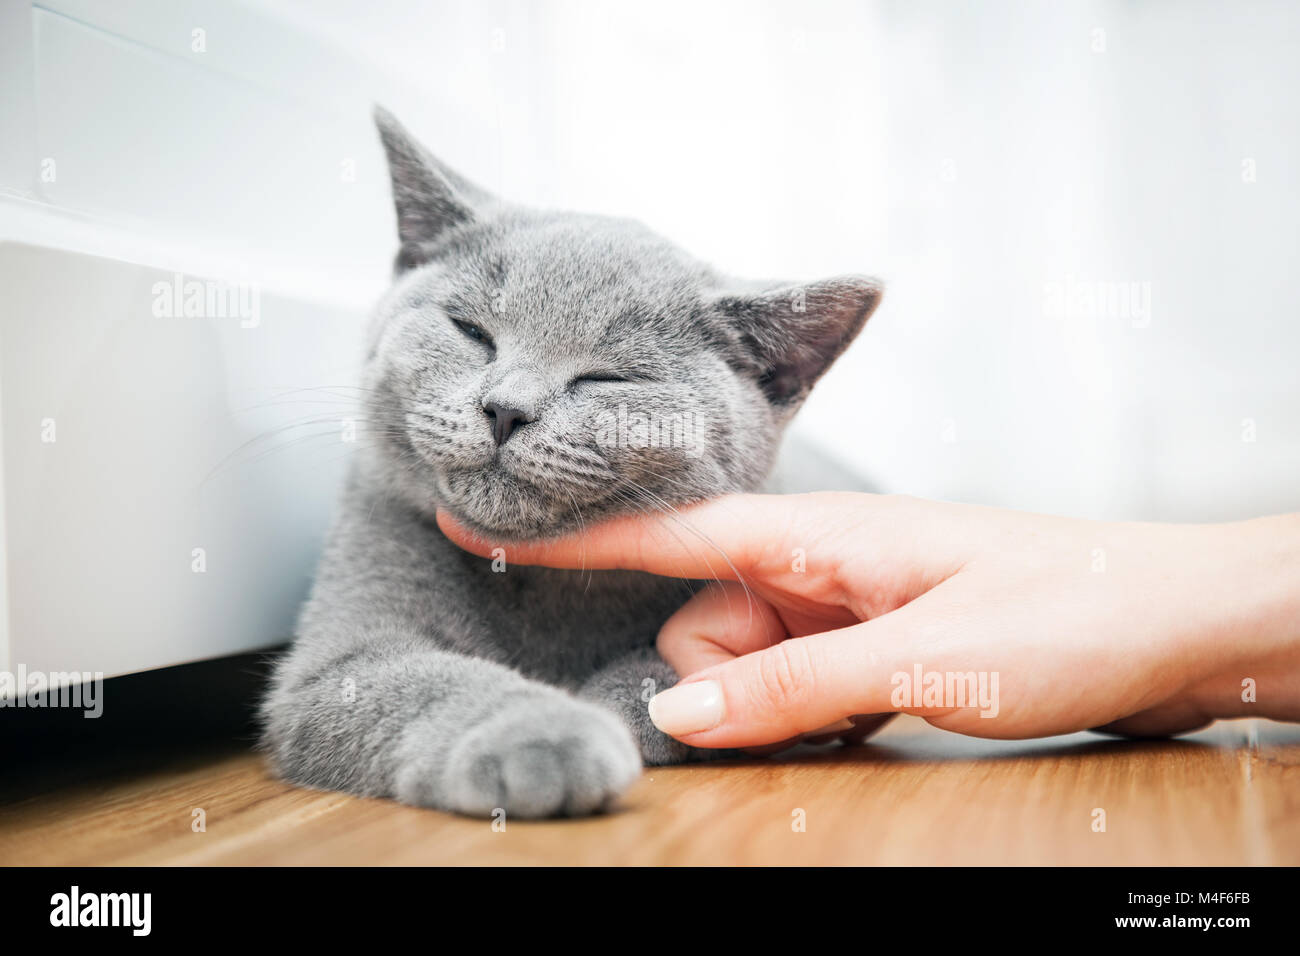 Happy kitten likes being stroked by woman's hand. Stock Photo